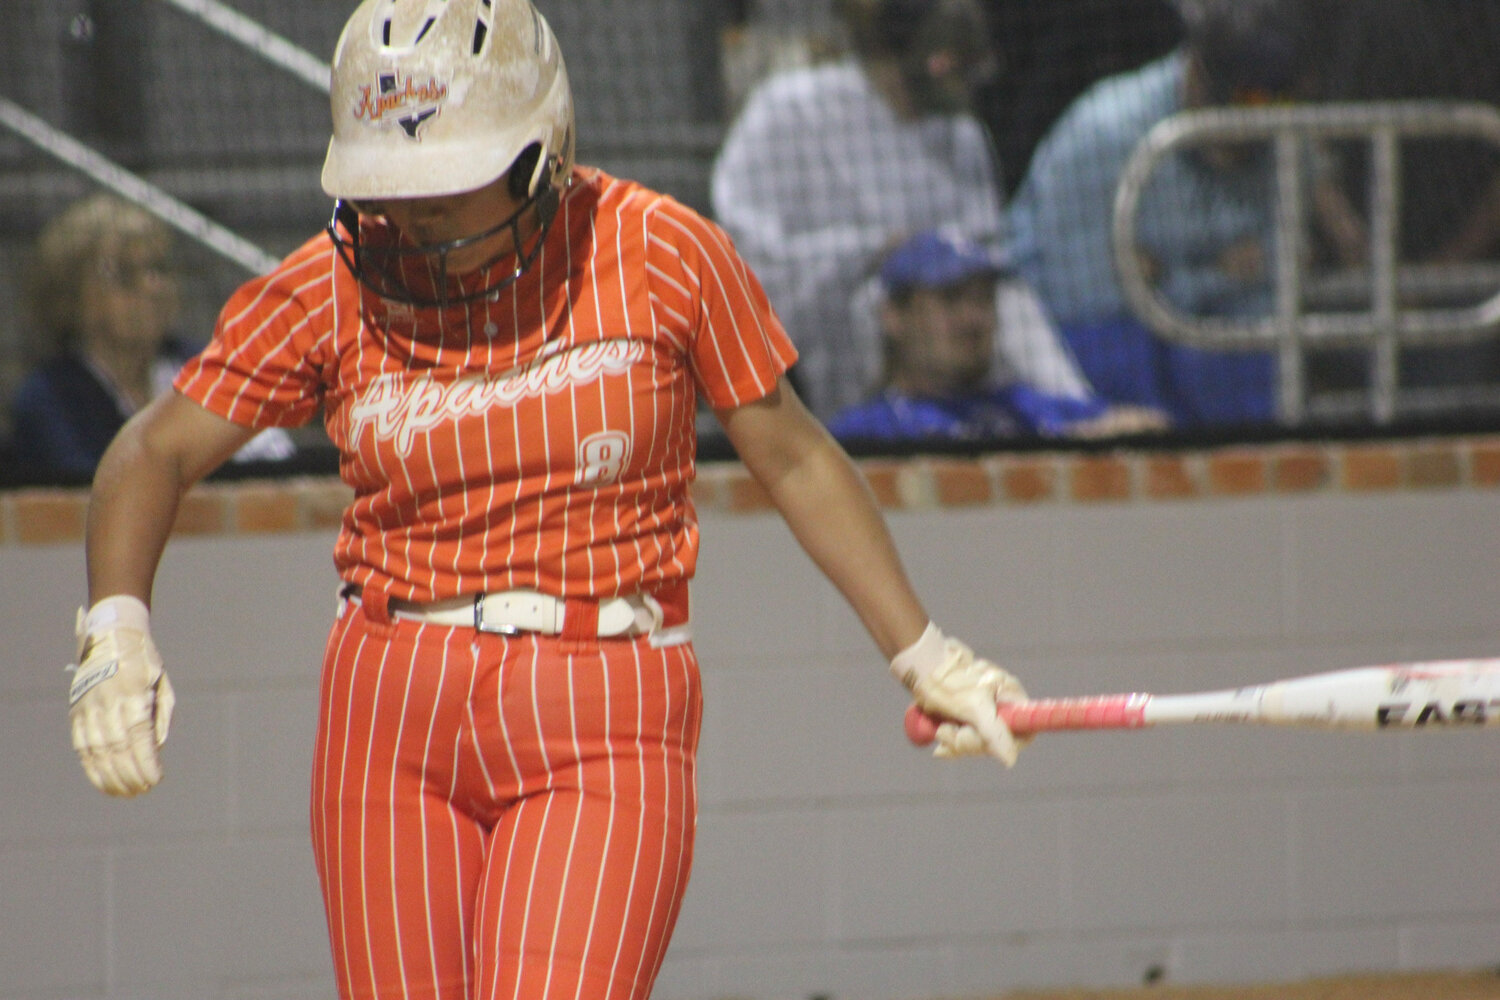 Lady Apaches freshmen Alexis Hernandez (8) at bat for Gonzales in the second district meeting against the La Vernia Lady Bears.